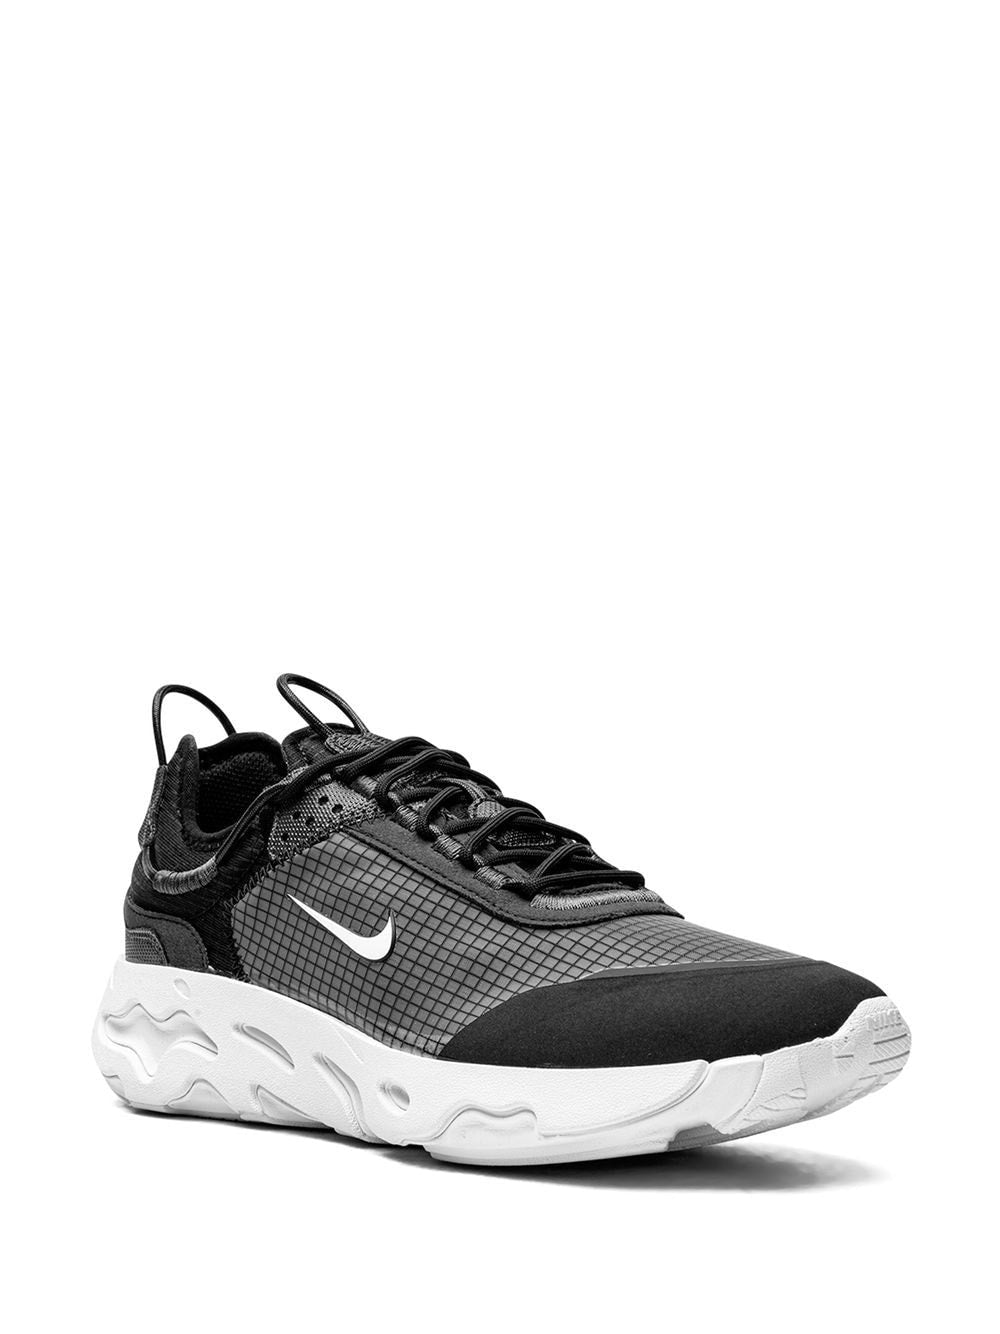 Nike-OUTLET-SALE-React Live Sneakers-ARCHIVIST